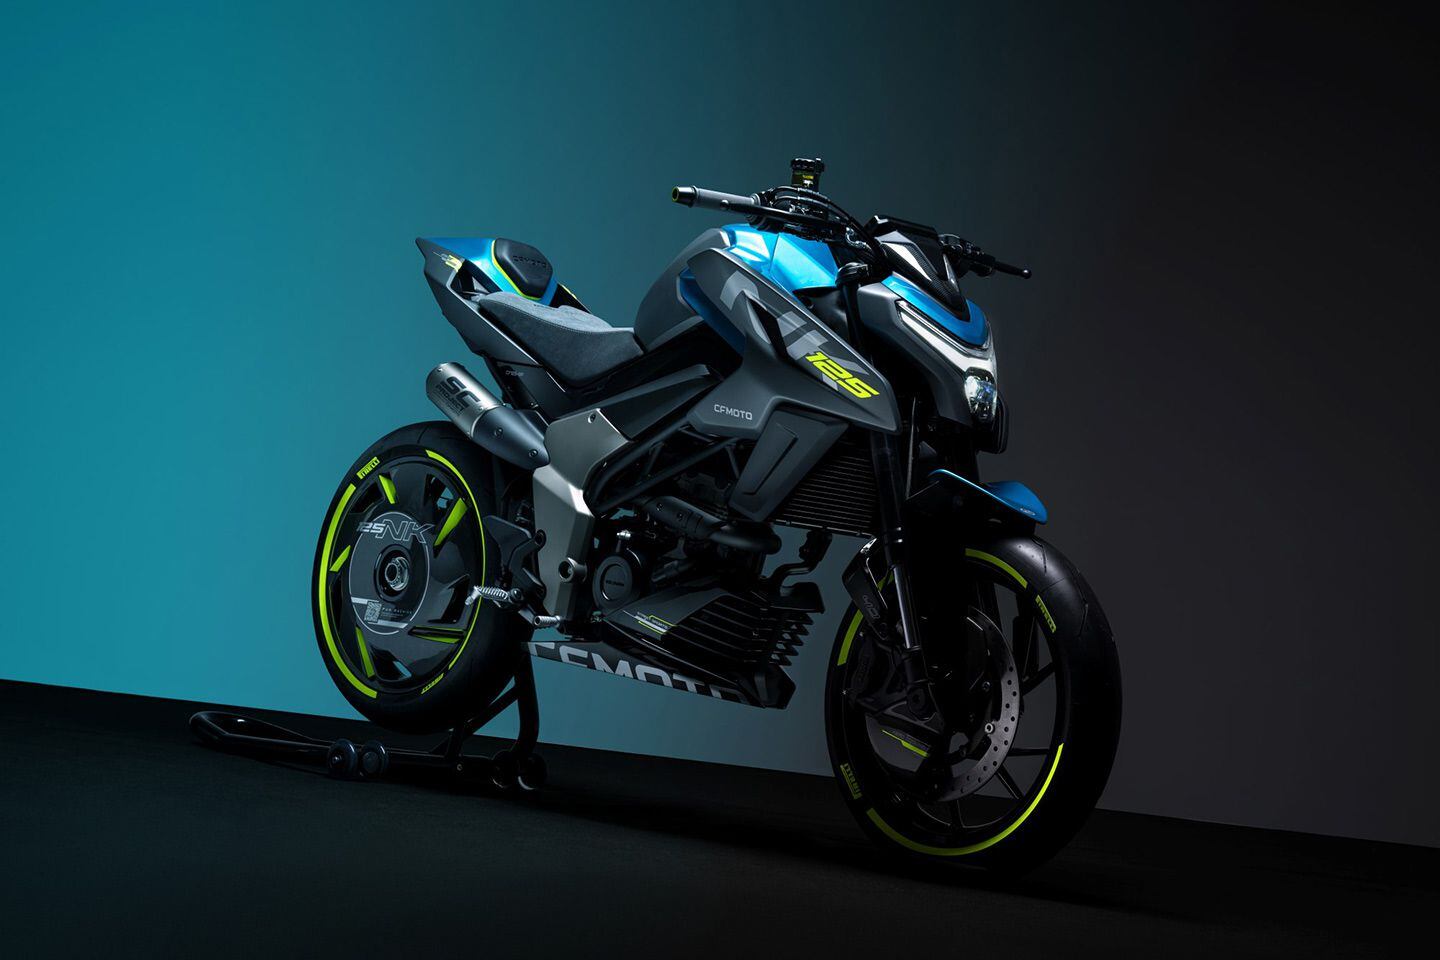 CFMoto’s 125NK concept was shown at EICMA.